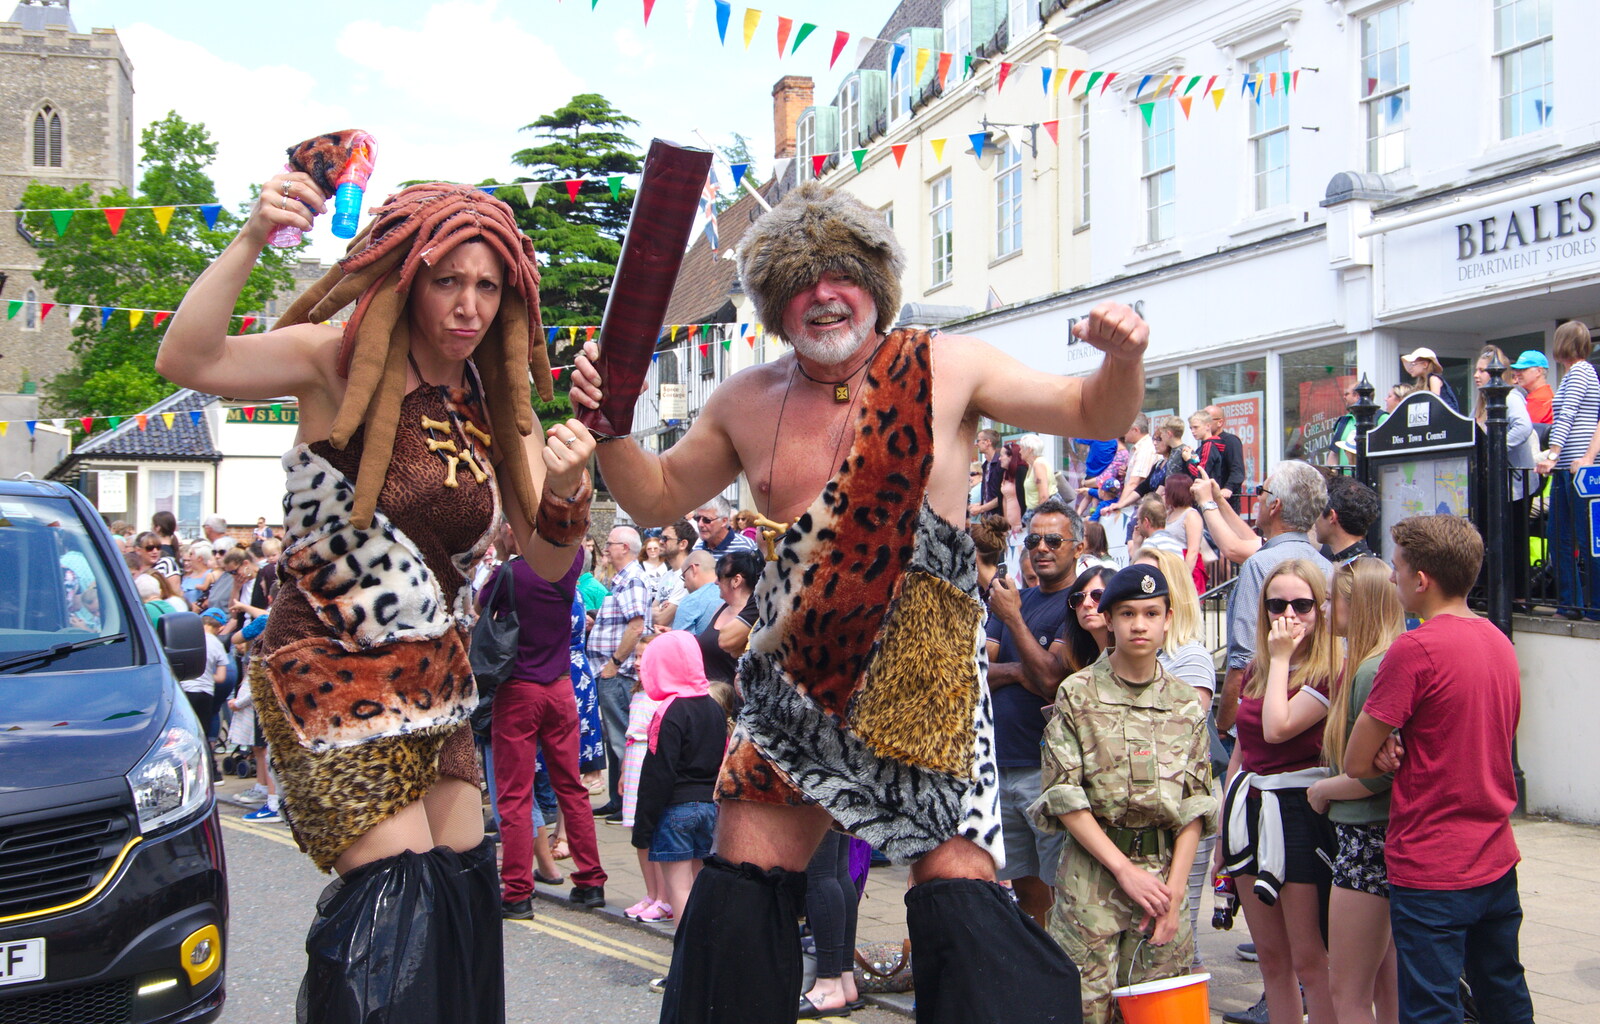 More cave-people posing from The Diss Carnival 2019, Diss, Norfolk - 9th June 2019